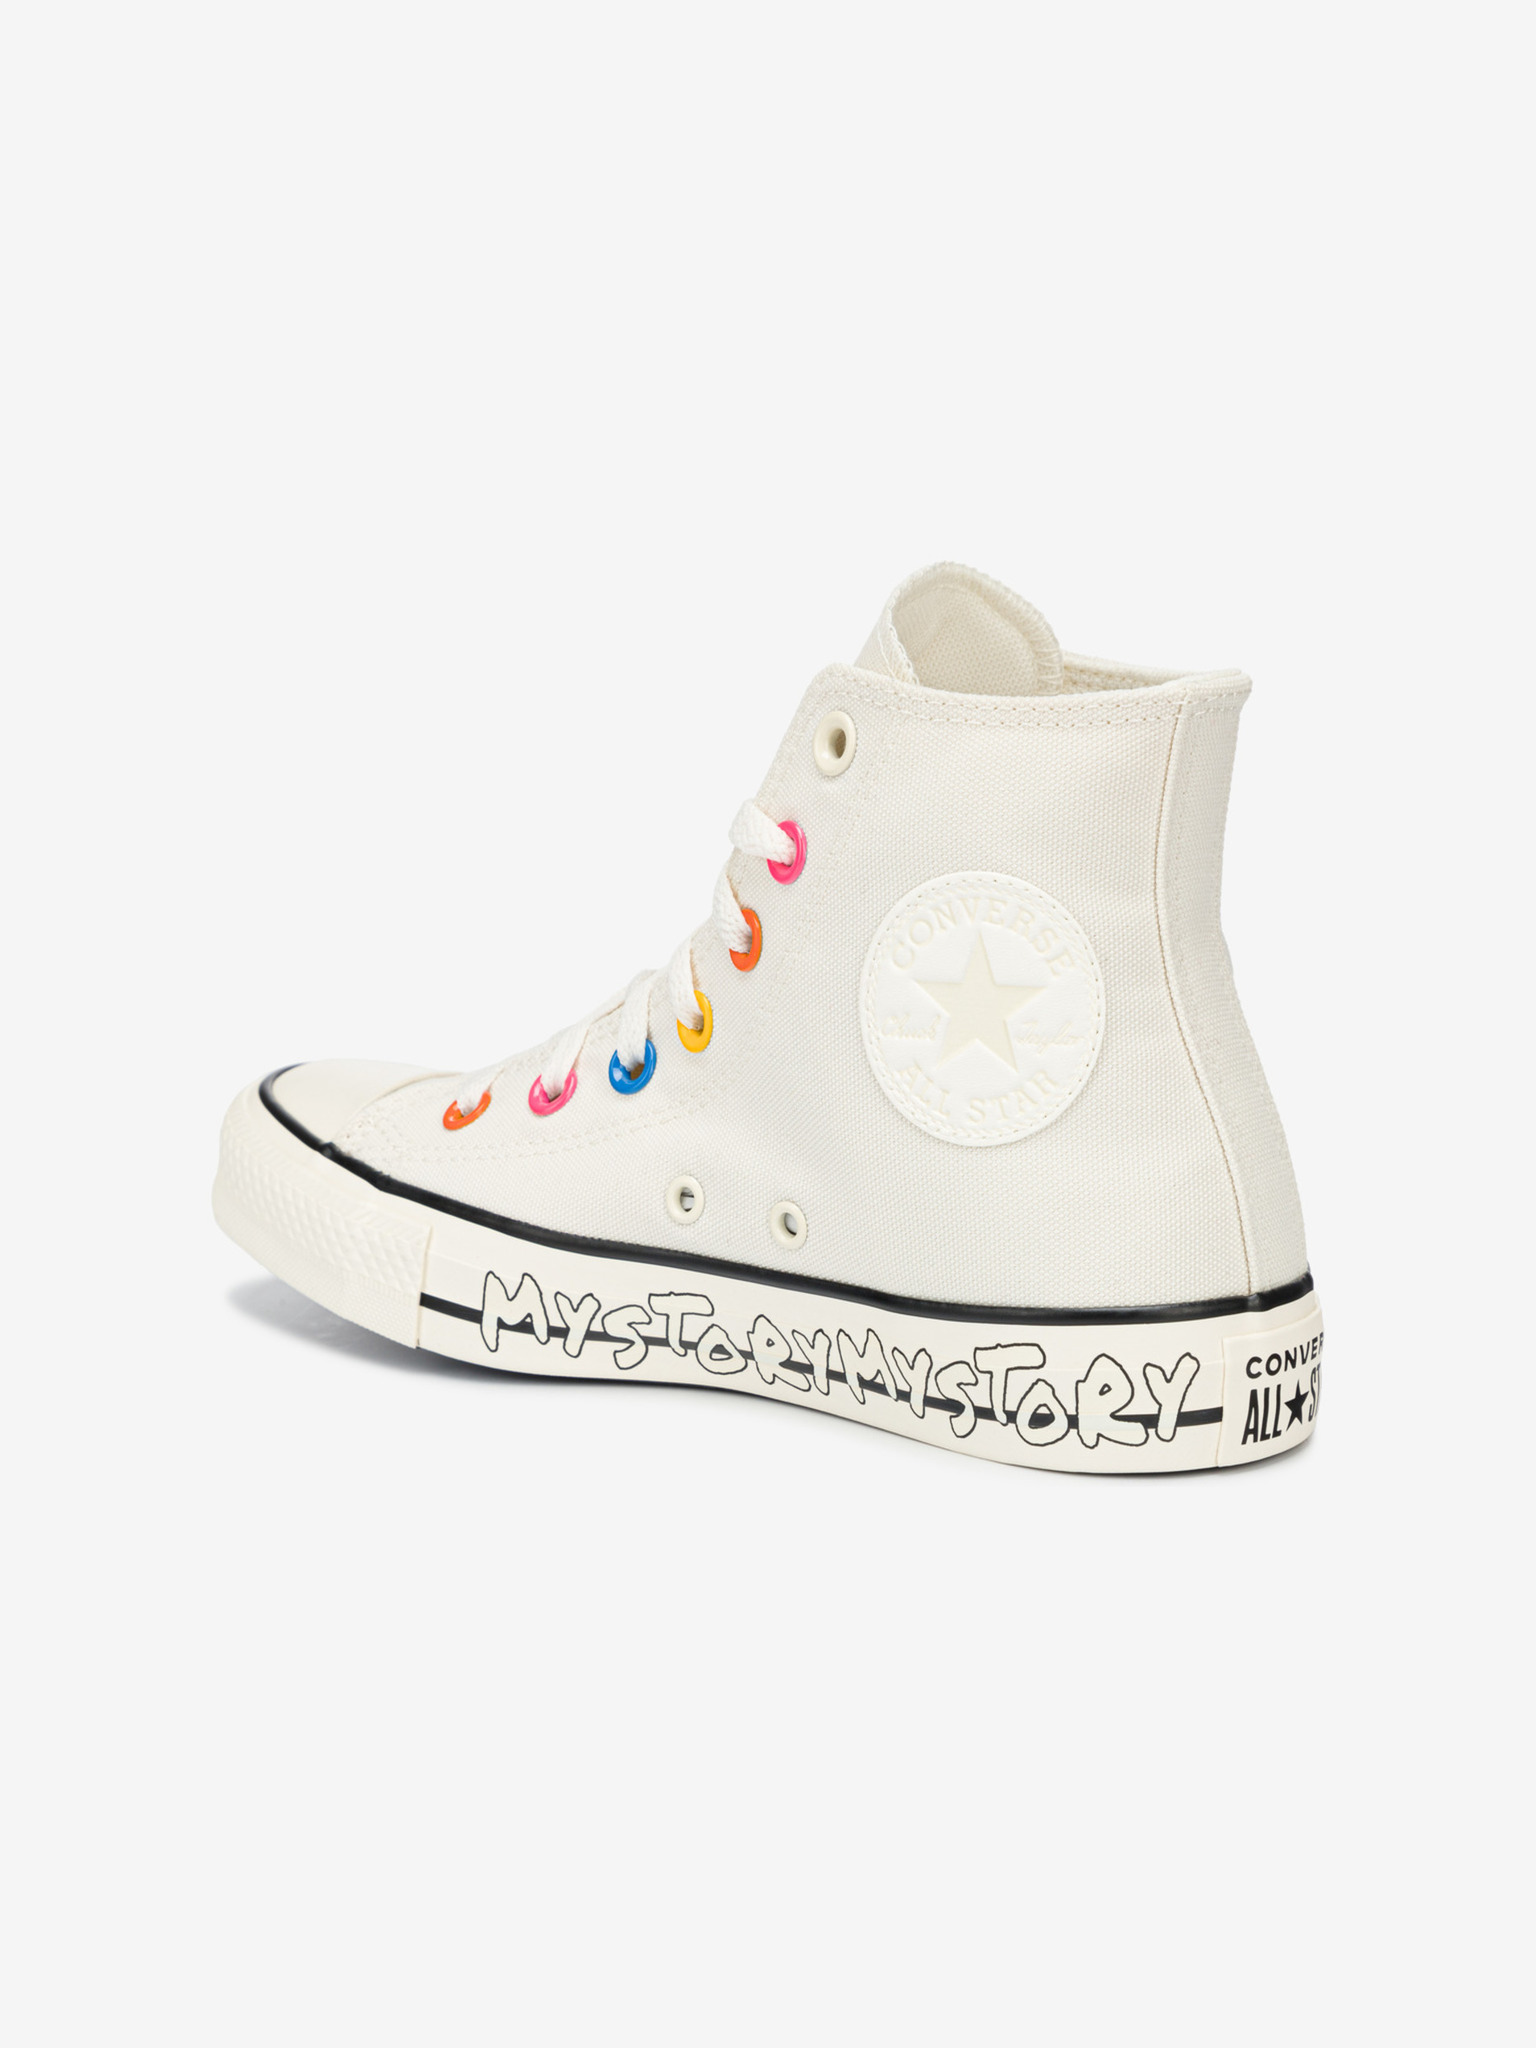 jam Noord staking Converse - My Story Chuck Taylor All Star Sneakers Bibloo.com